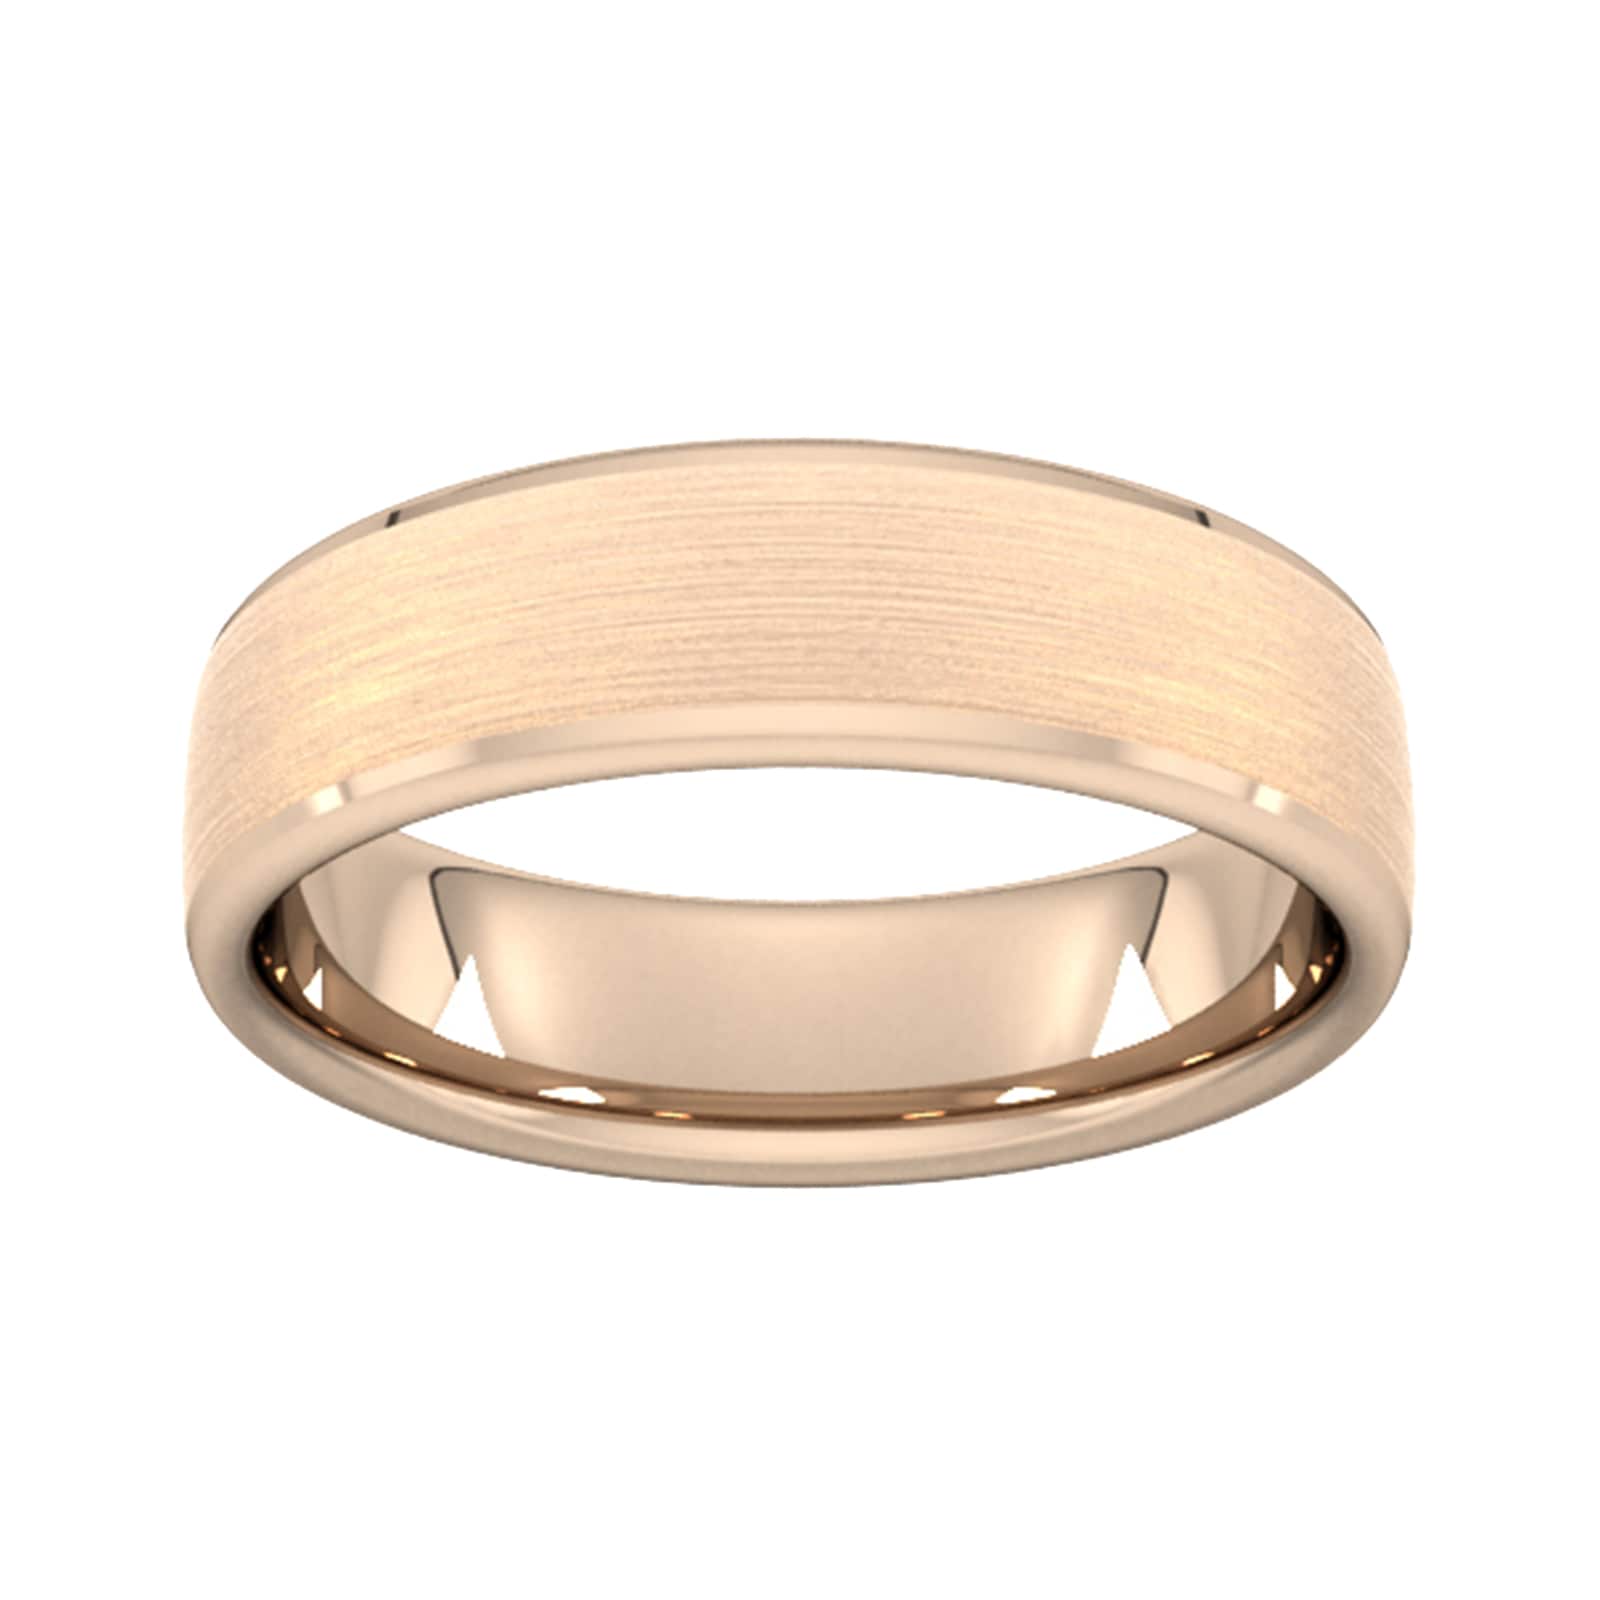 6mm Traditional Court Standard Polished Chamfered Edges With Matt Centre Wedding Ring In 18 Carat Rose Gold - Ring Size L